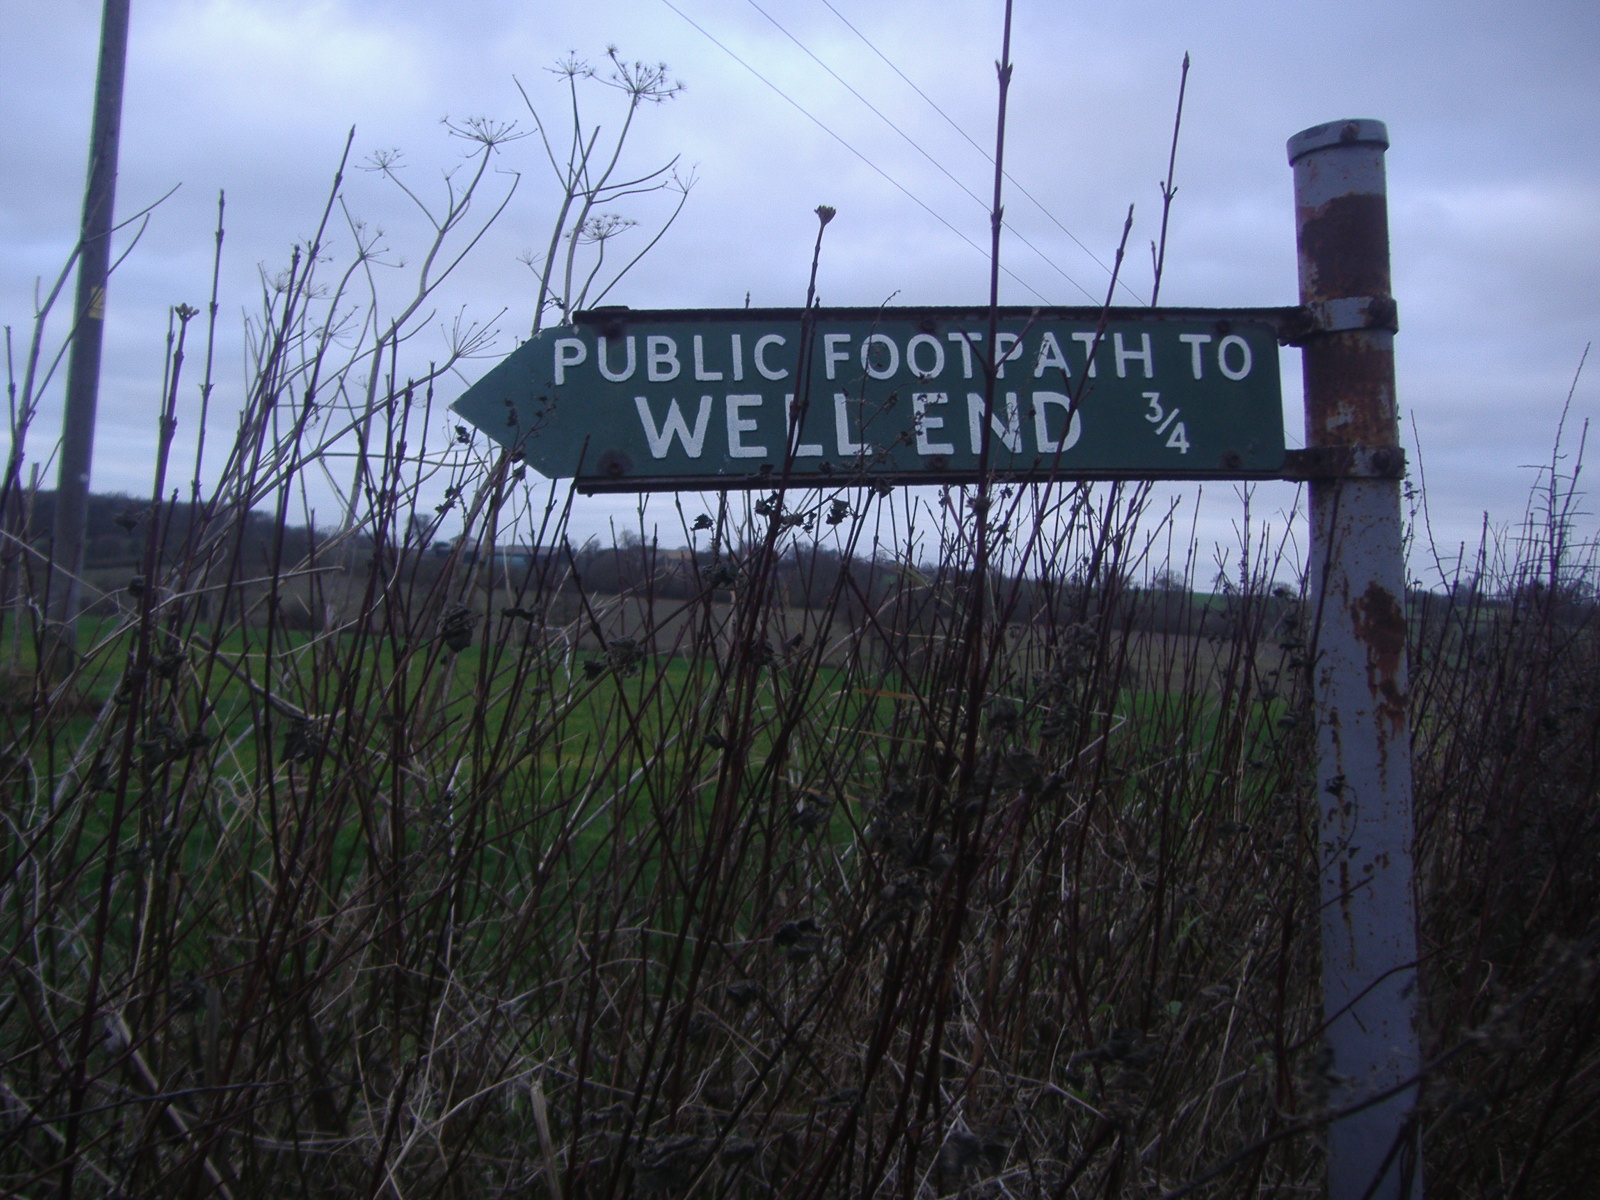 a sign points to the public footpath to well - end